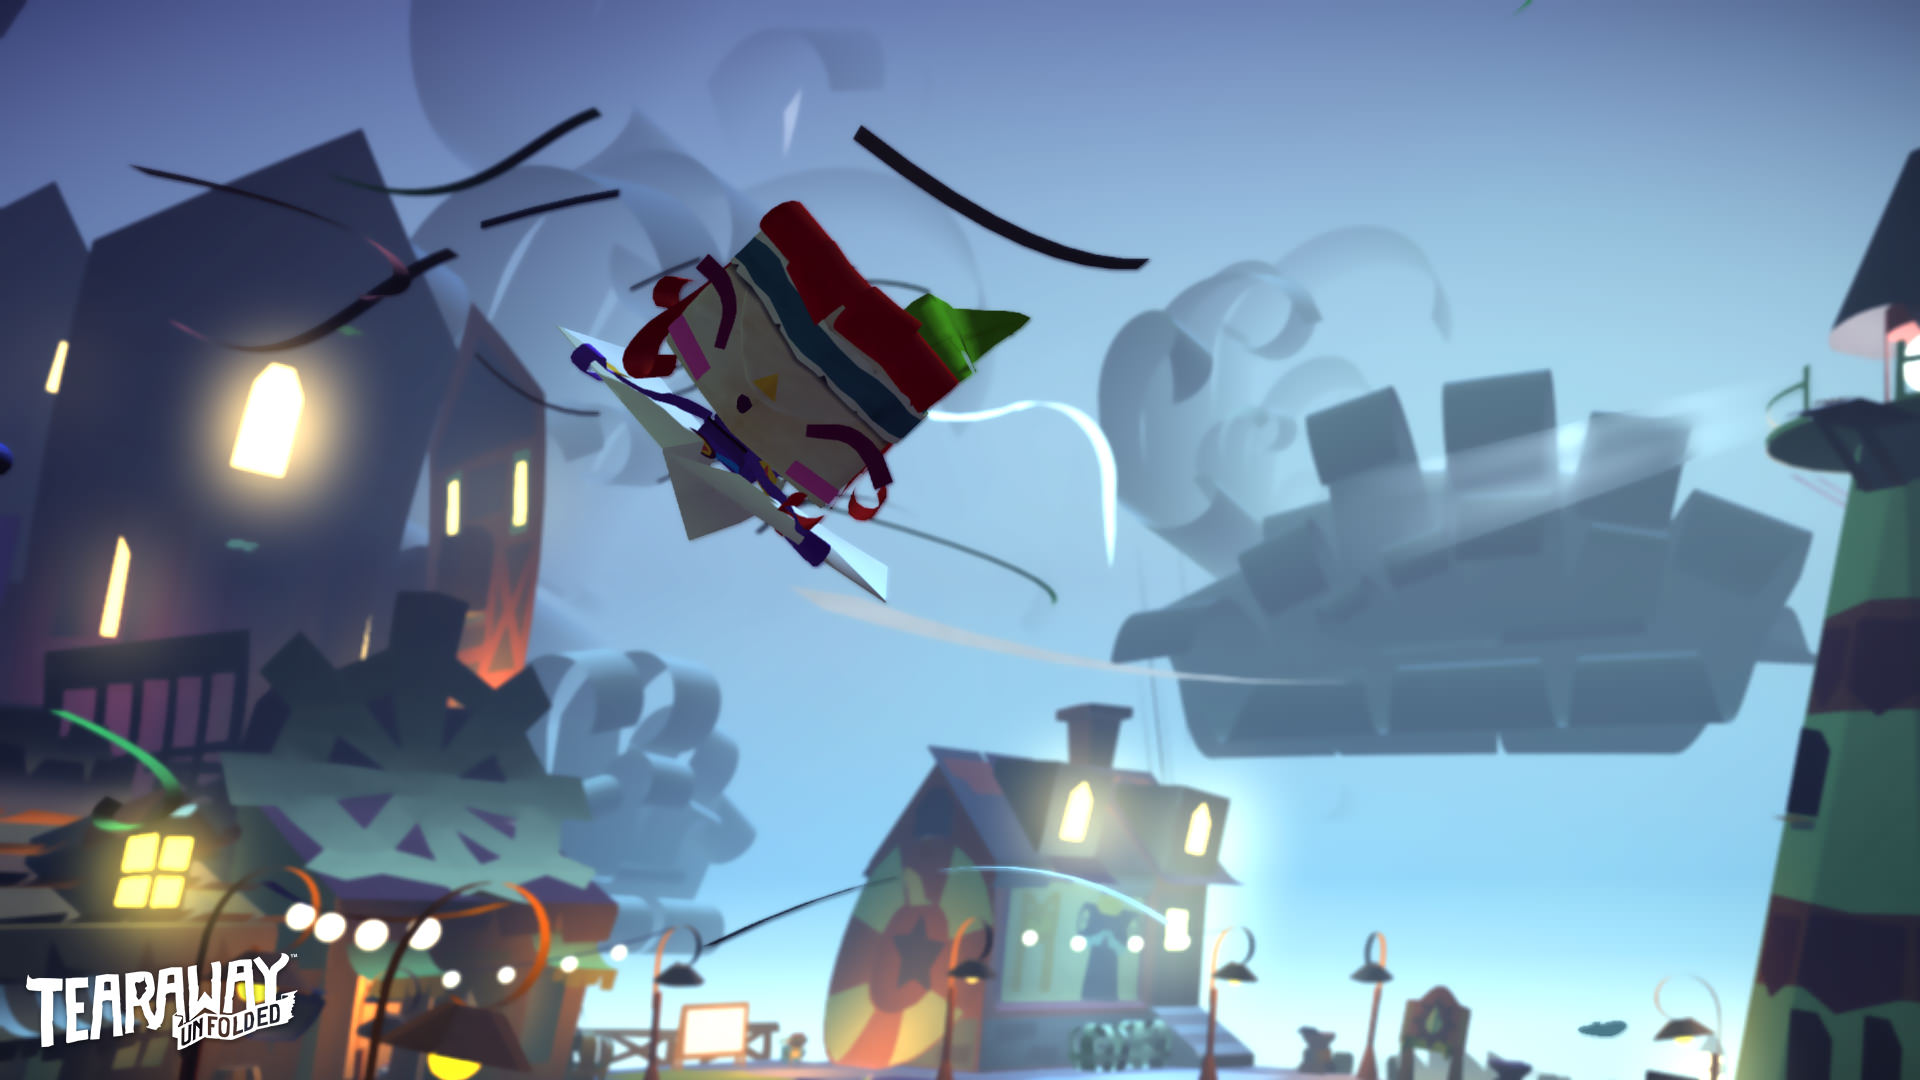 Tearaway Unfolded Backgrounds, Compatible - PC, Mobile, Gadgets| 1920x1080 px